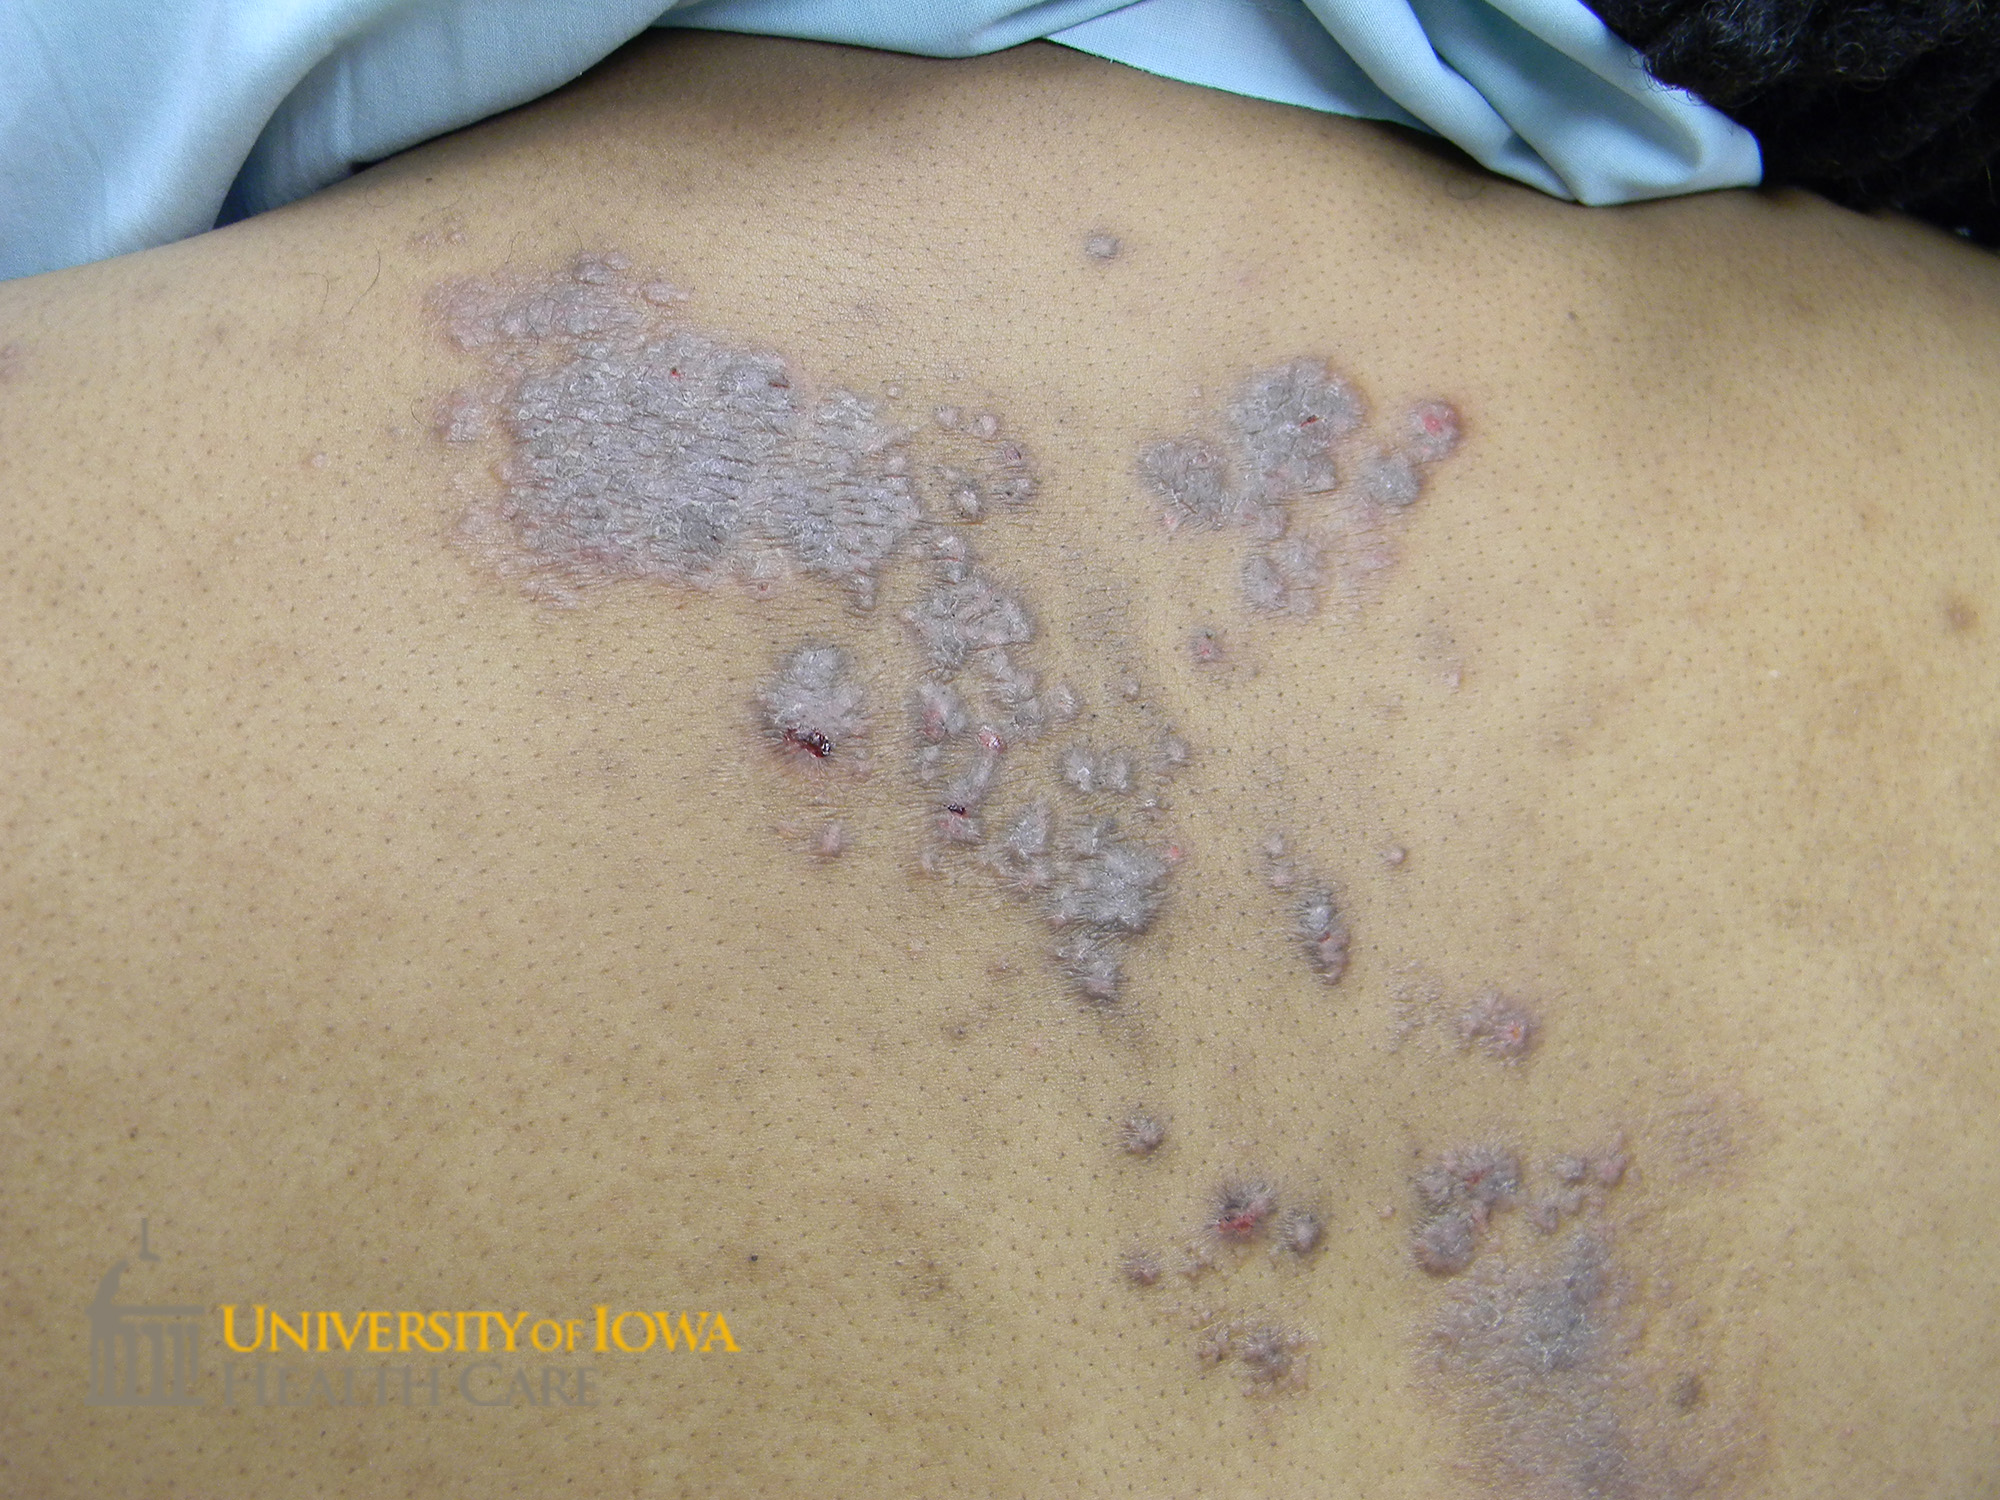 Grouped and confluent cloudy hyperpigmented vesicles and papules in a dermatomal distribution on the upper back. (click images for higher resolution).